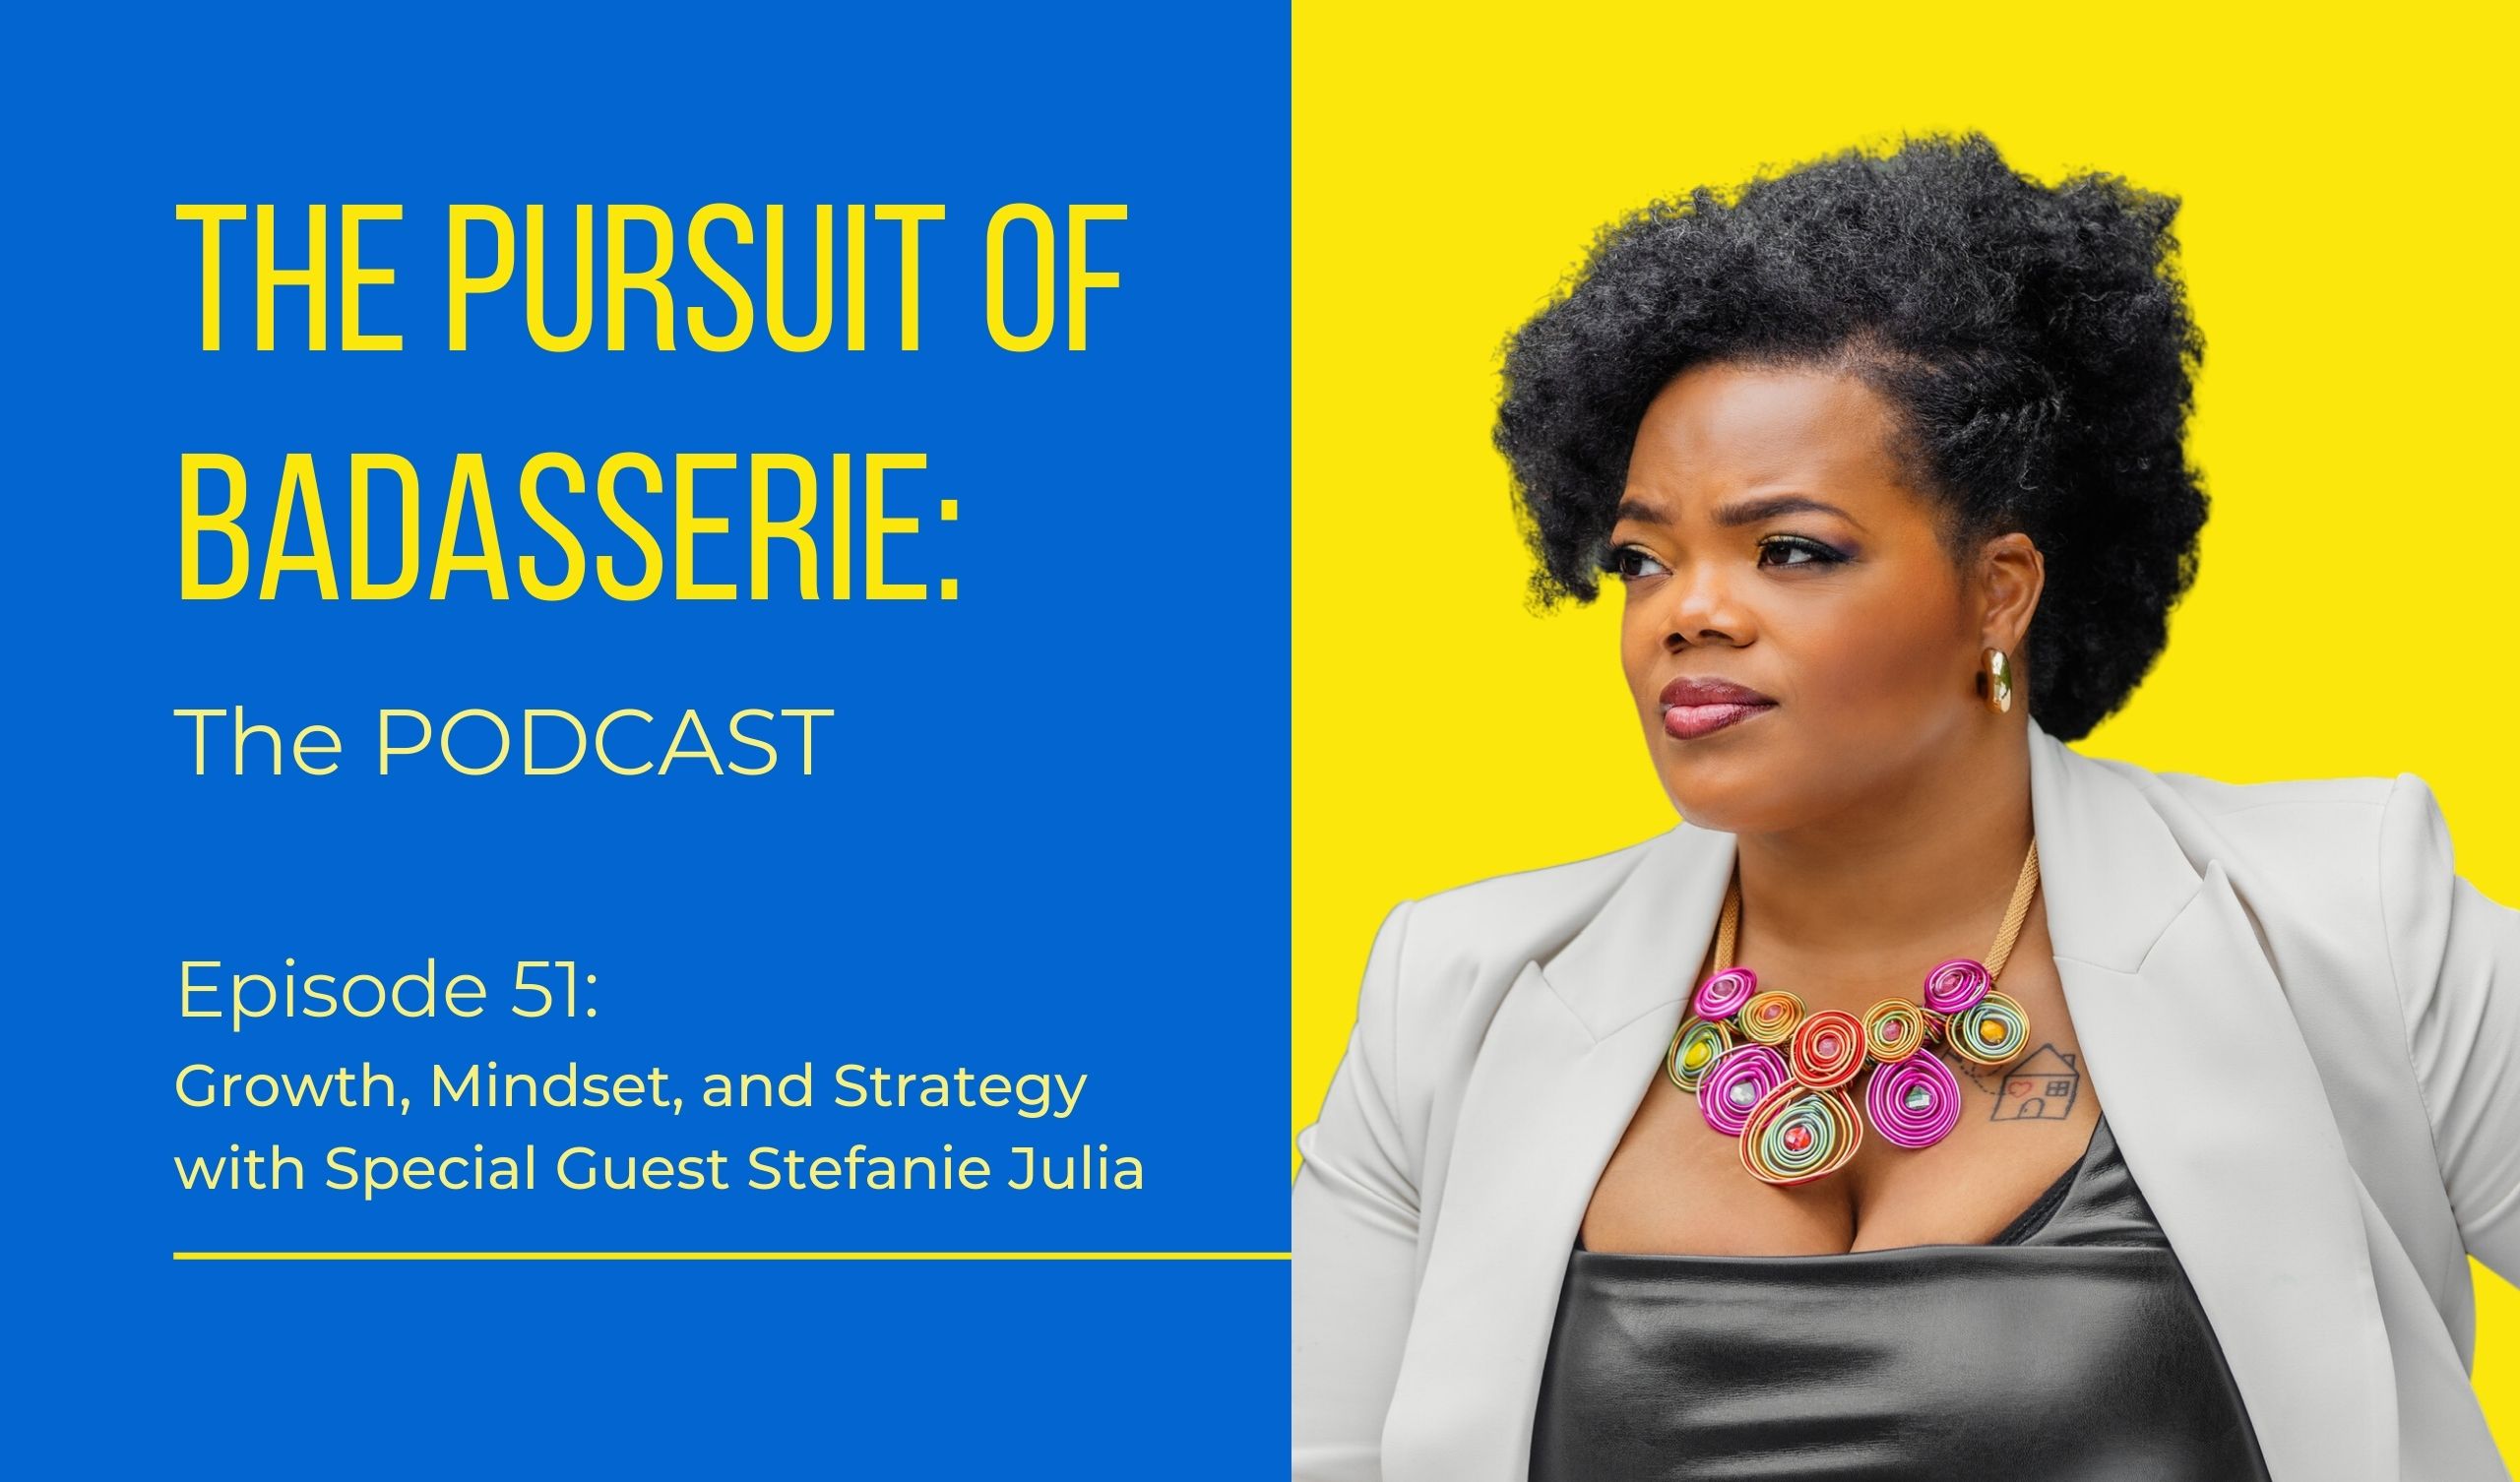 Growth, Mindset, and Strategy with Stefanie Julia